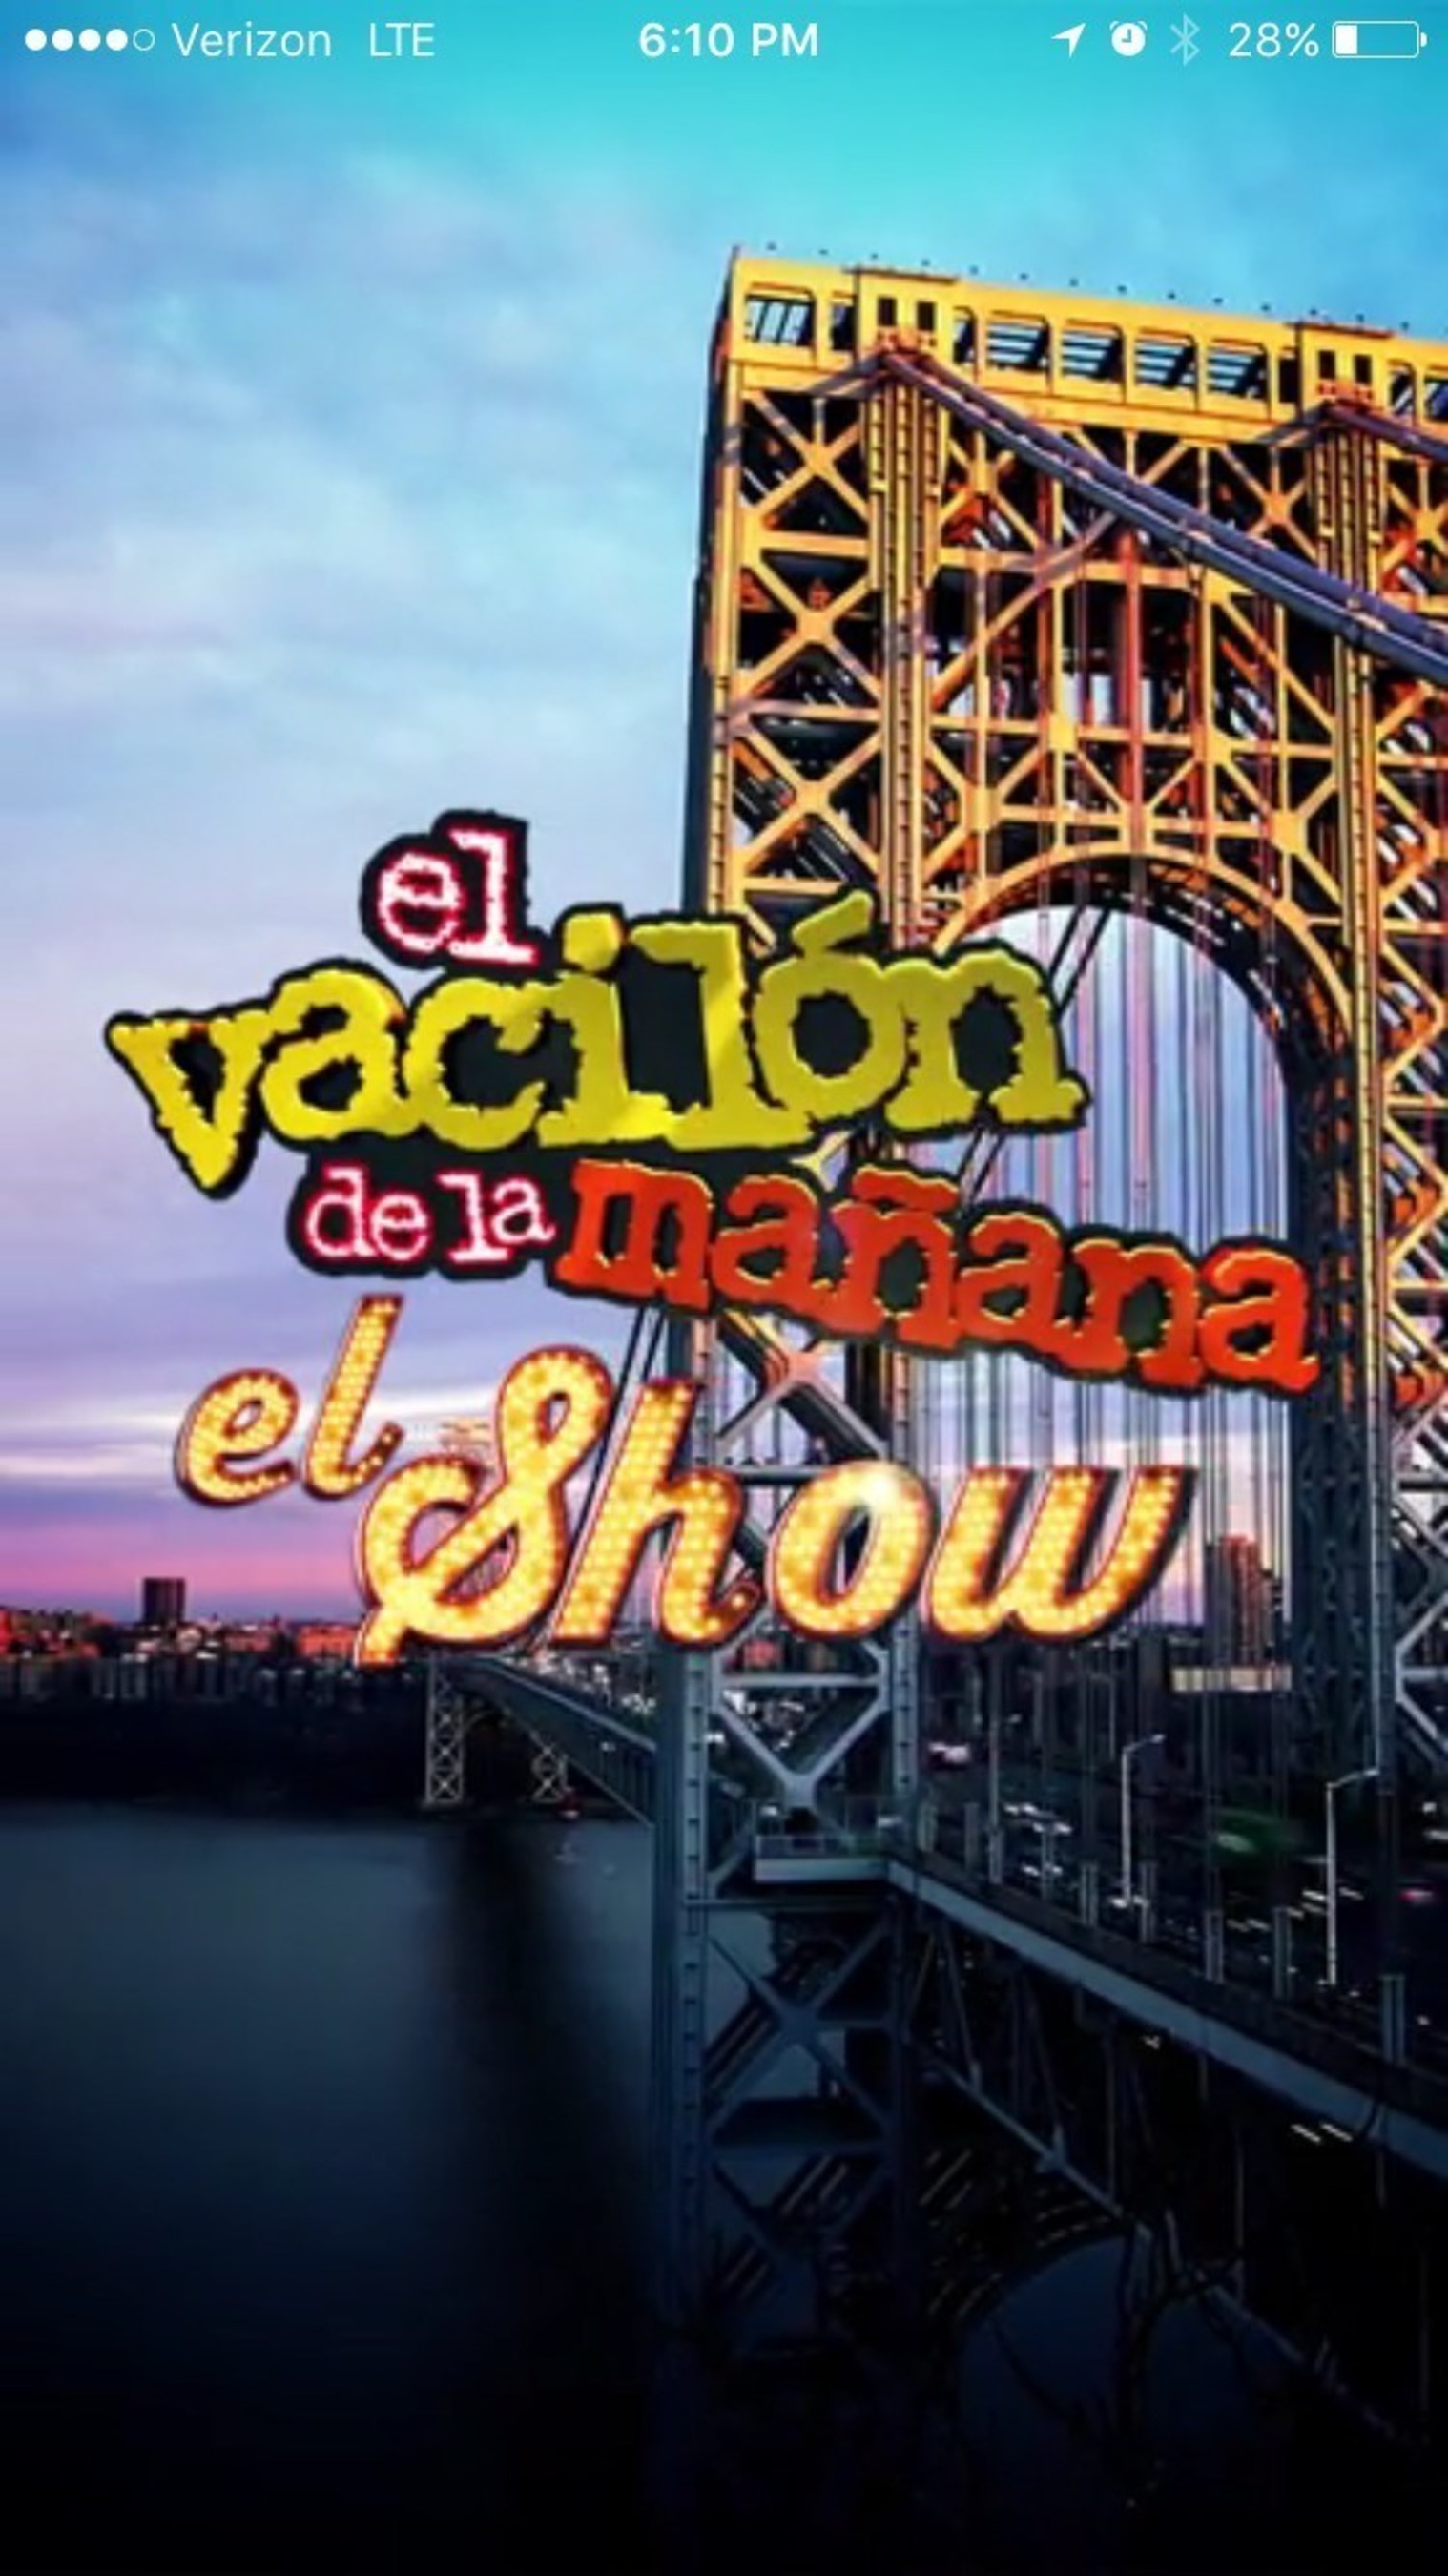 El Vacilon De La Manana , El Show - LaMusica's daily web series featuring NYC's number one morning radio show on WSKQ-FM. Originating from its actual on-air studio, this variety show will feature the day's "Trending Topics" in entertainment; news, celebrity gossip and actualities, along with some of Vacilon's most popular comedic segments.